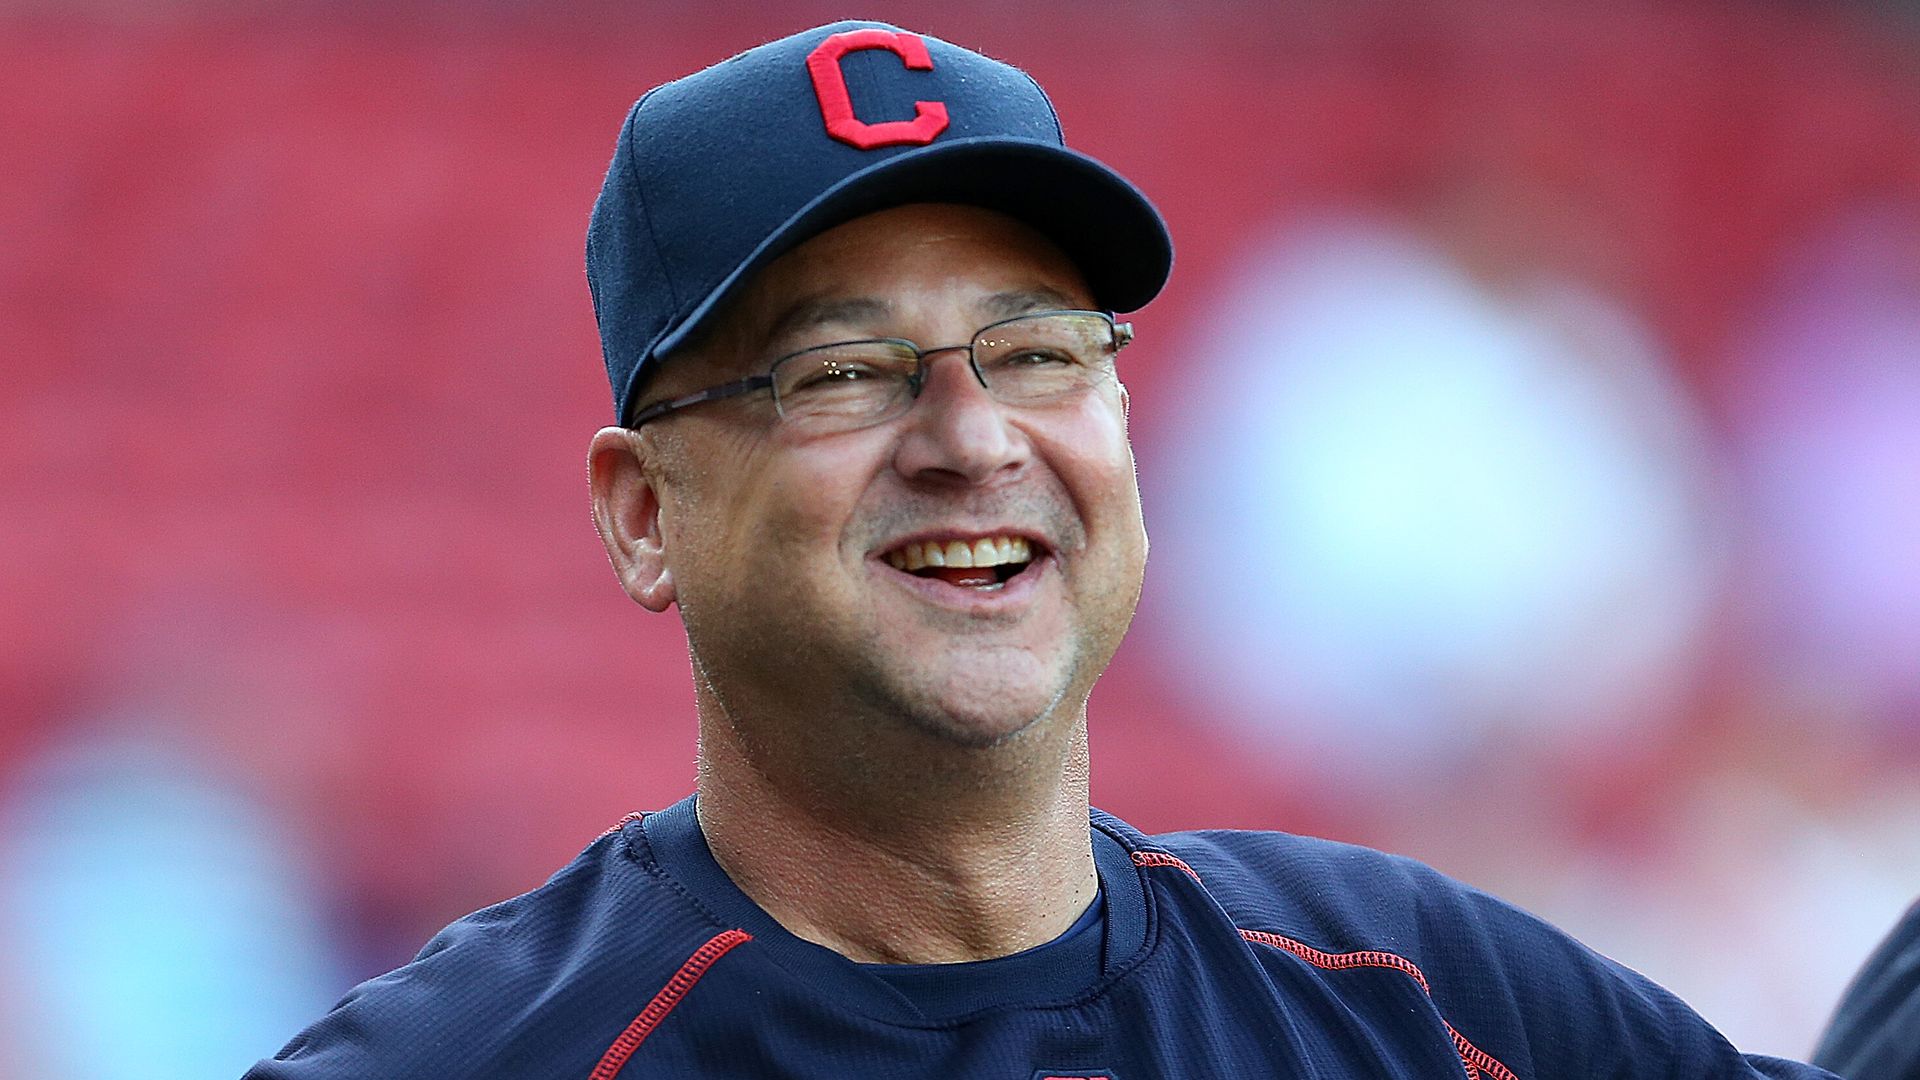 Terry Francona bids farewell at Guardians final home game - Axios